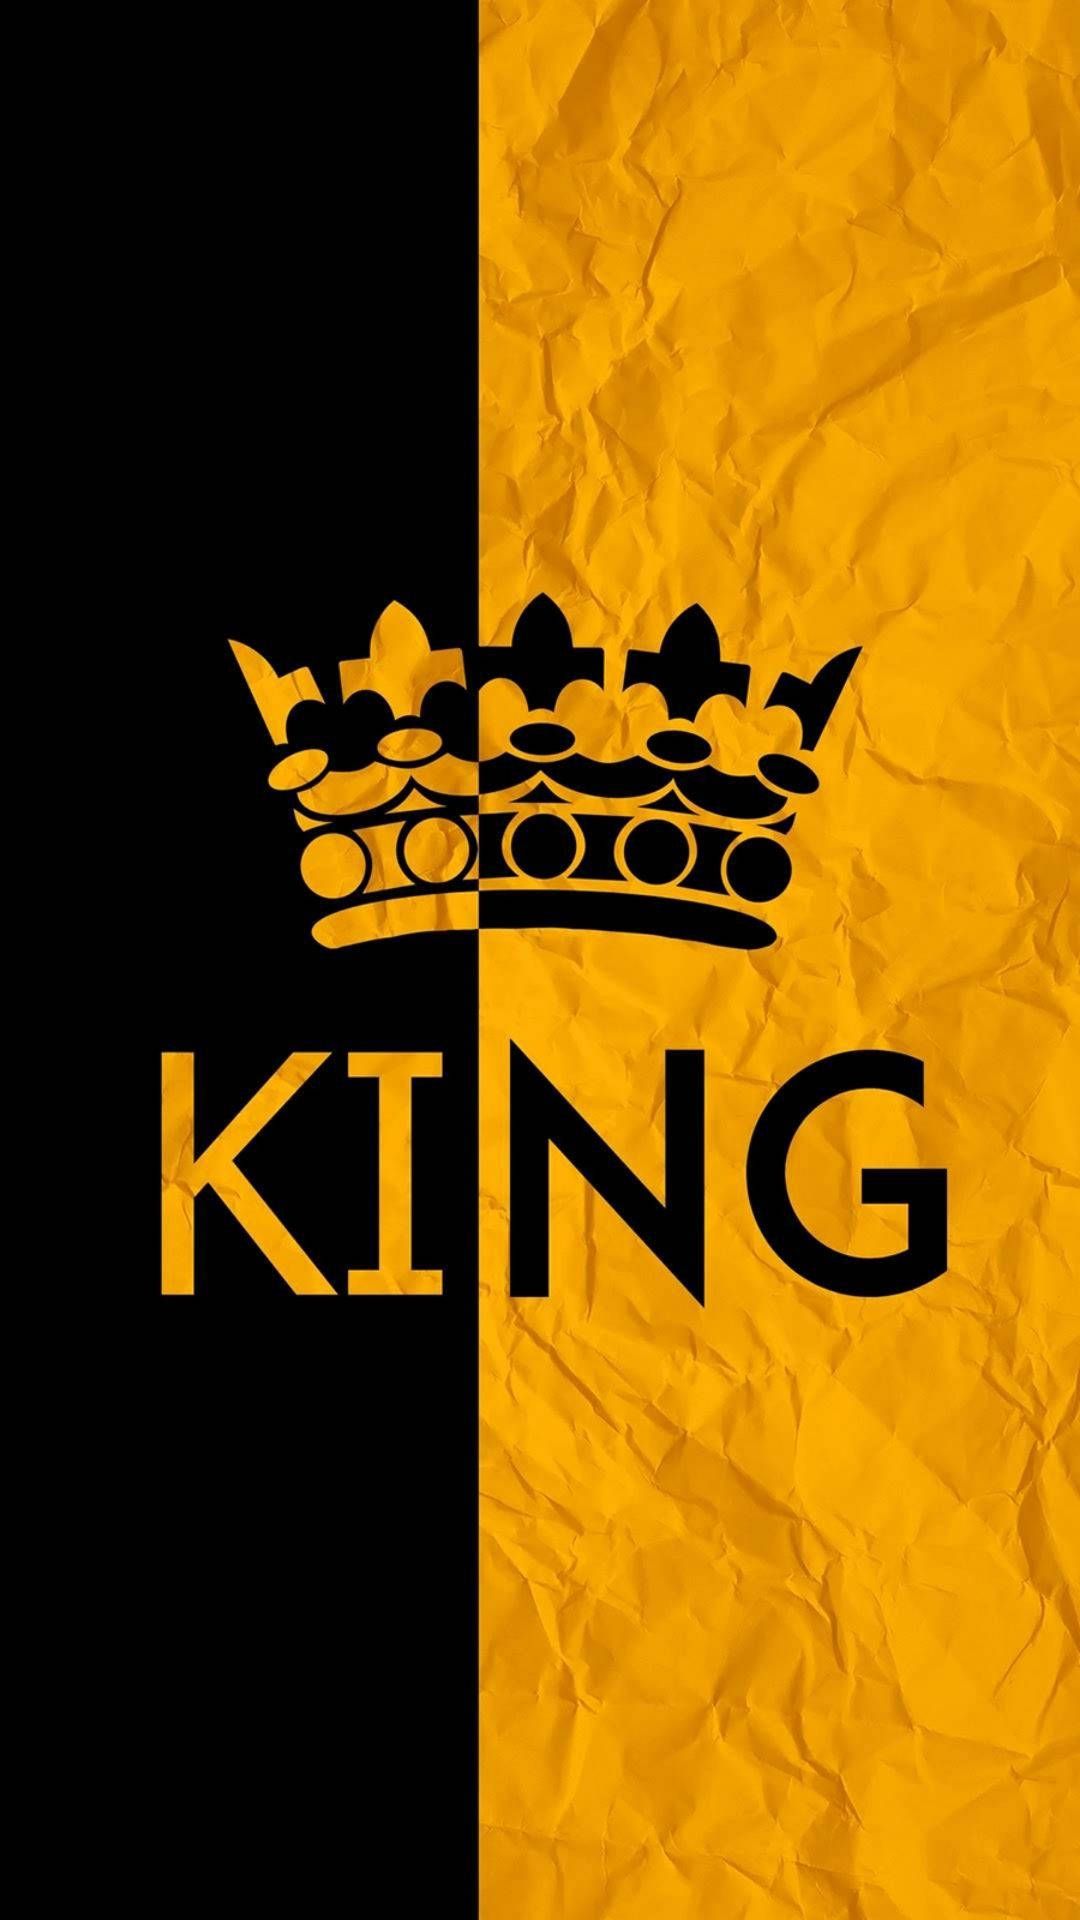 King iPhone Wallpaper with high-resolution 1080x1920 pixel. You can use this wallpaper for your iPhone 5, 6, 7, 8, X, XS, XR backgrounds, Mobile Screensaver, or iPad Lock Screen - Crown